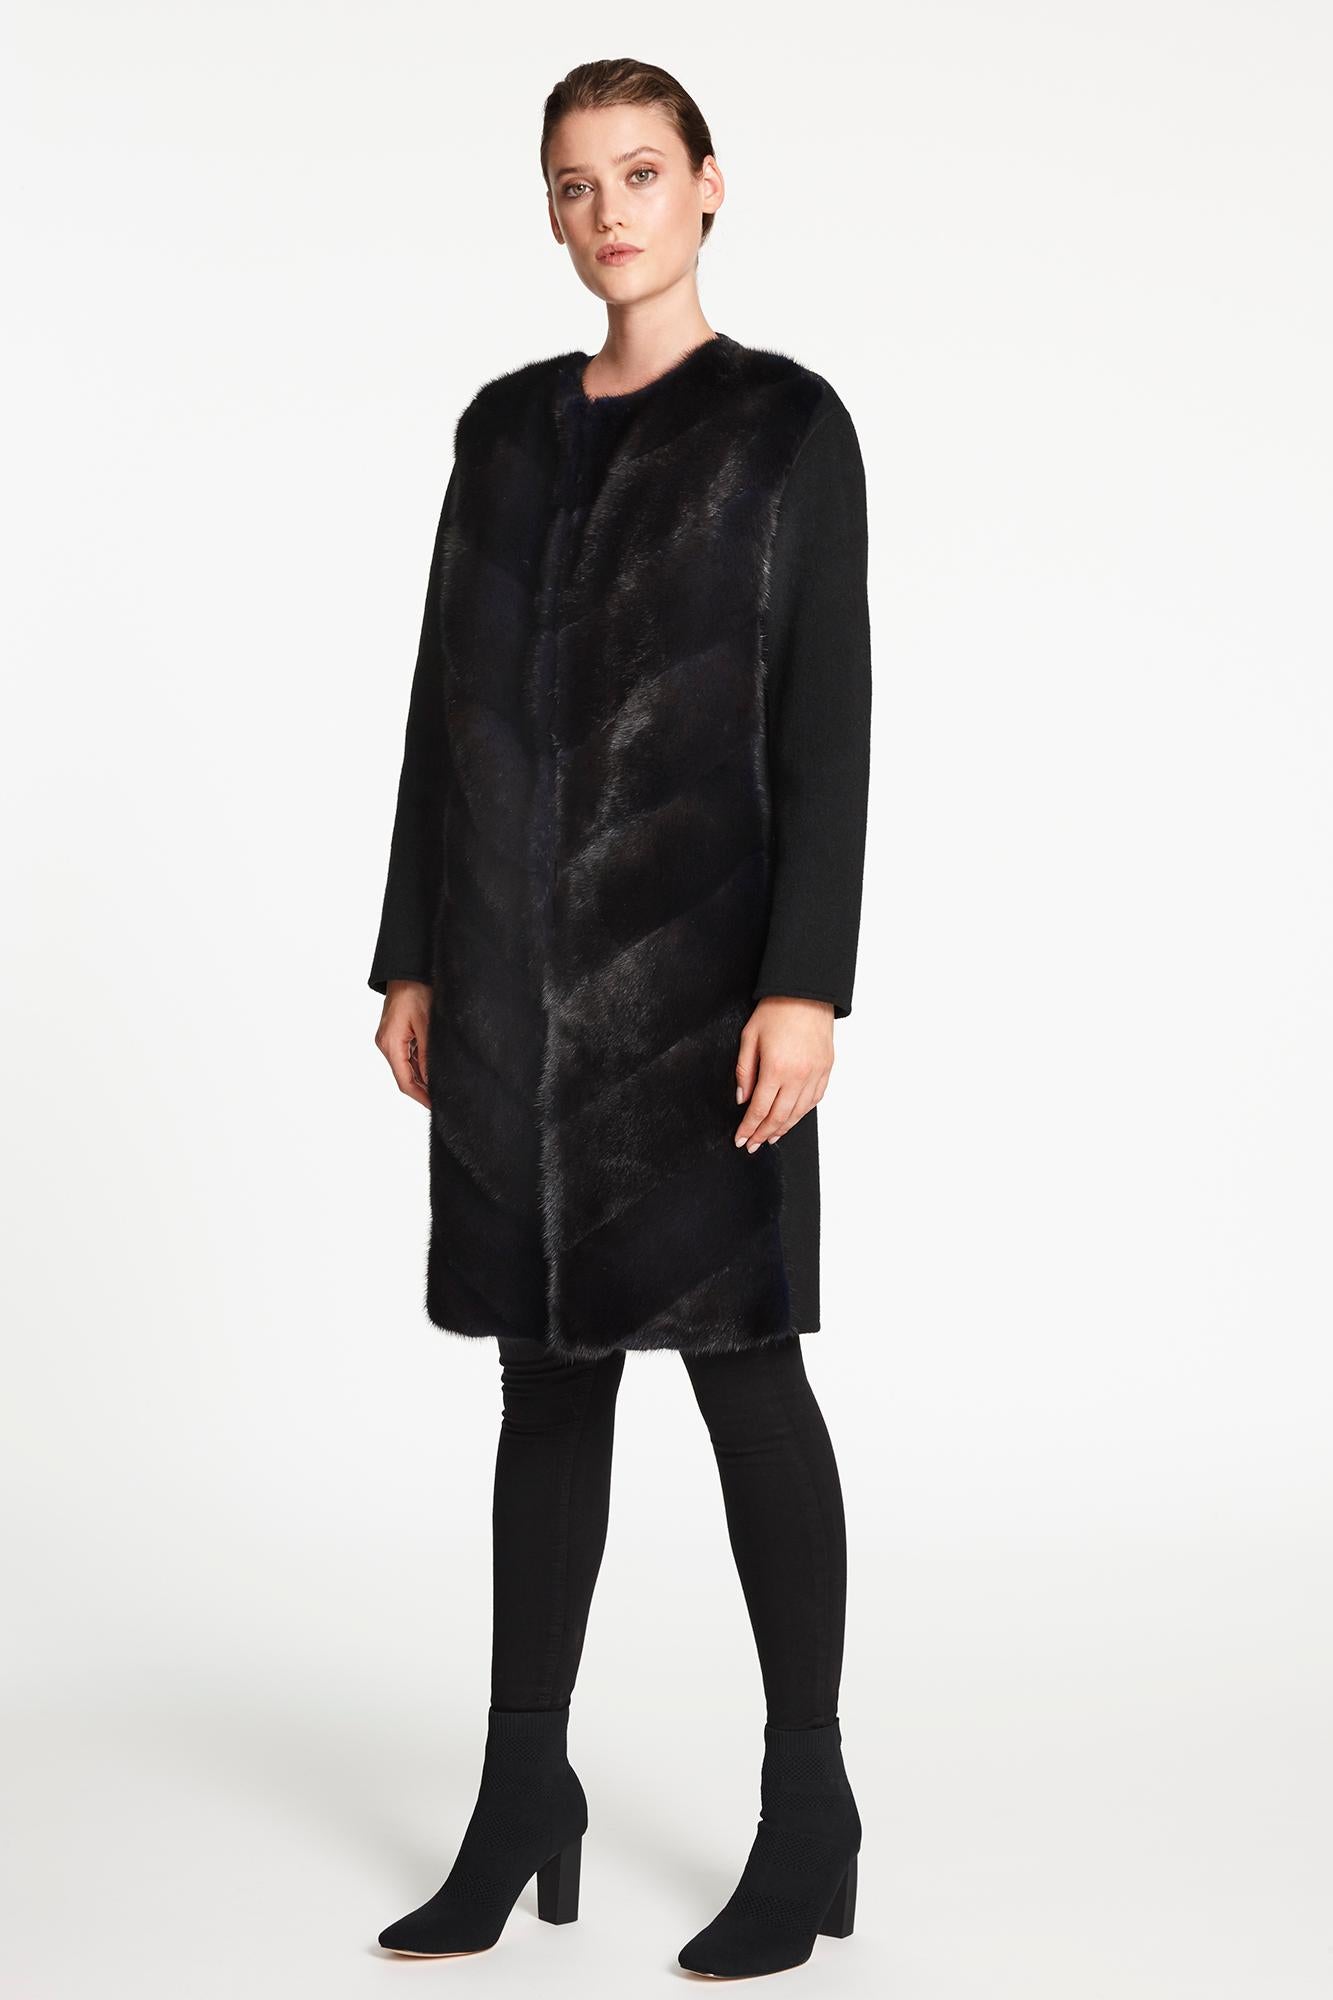 Collarless Coat Cashmere and in Navy Black Mink Fur 2